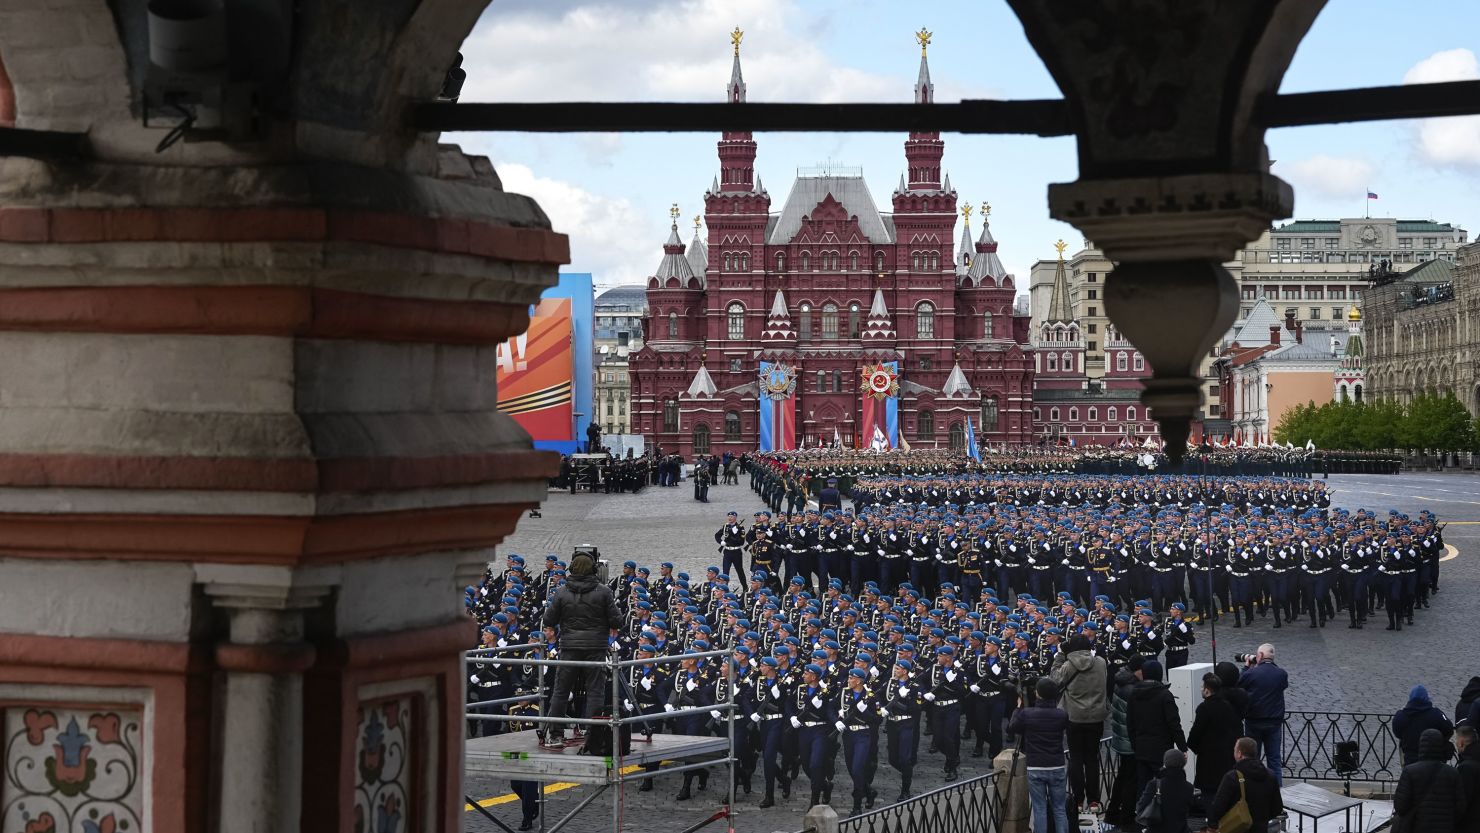 Russian soldiers march during the Victory Day military parade dress rehearsal at Red Square in Moscow, on May 5. The parade will take place on May 9, marking the 79th anniversary of victory in the Second World War.